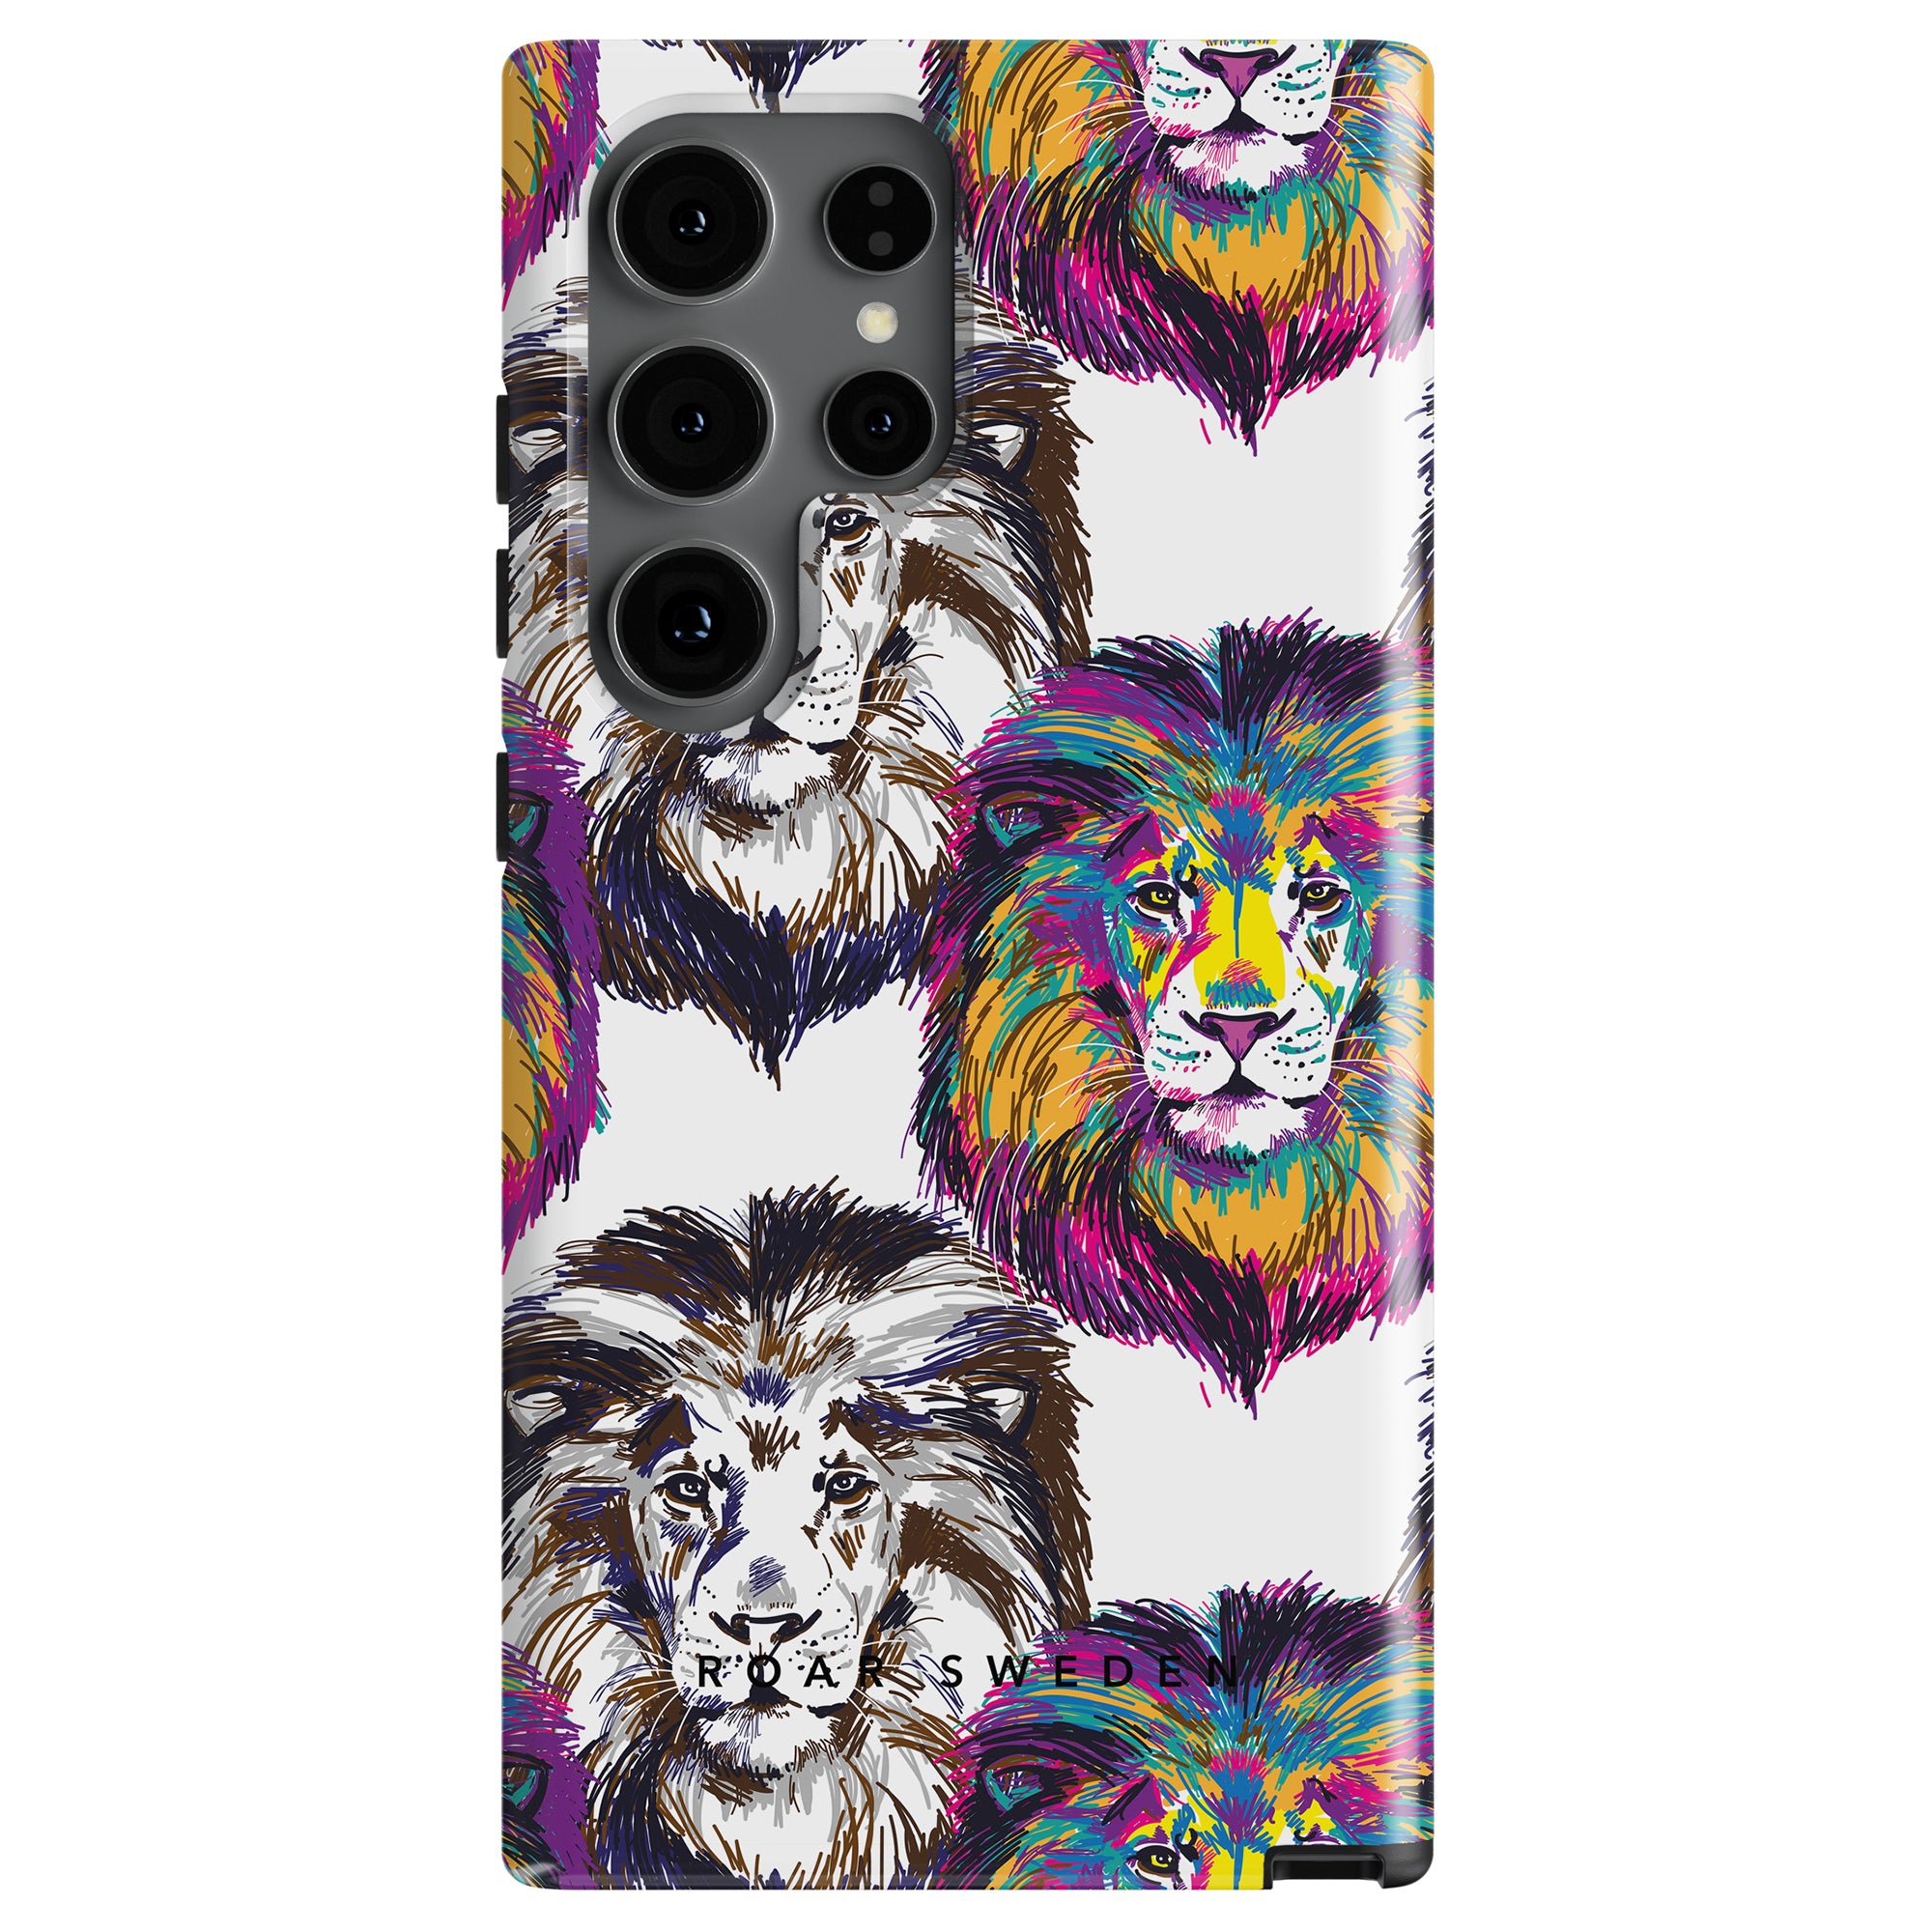 Simba - Tough Case featuring a colorful lejon skal design with multiple lion faces in various vibrant hues, customized for a phone with triple cameras.